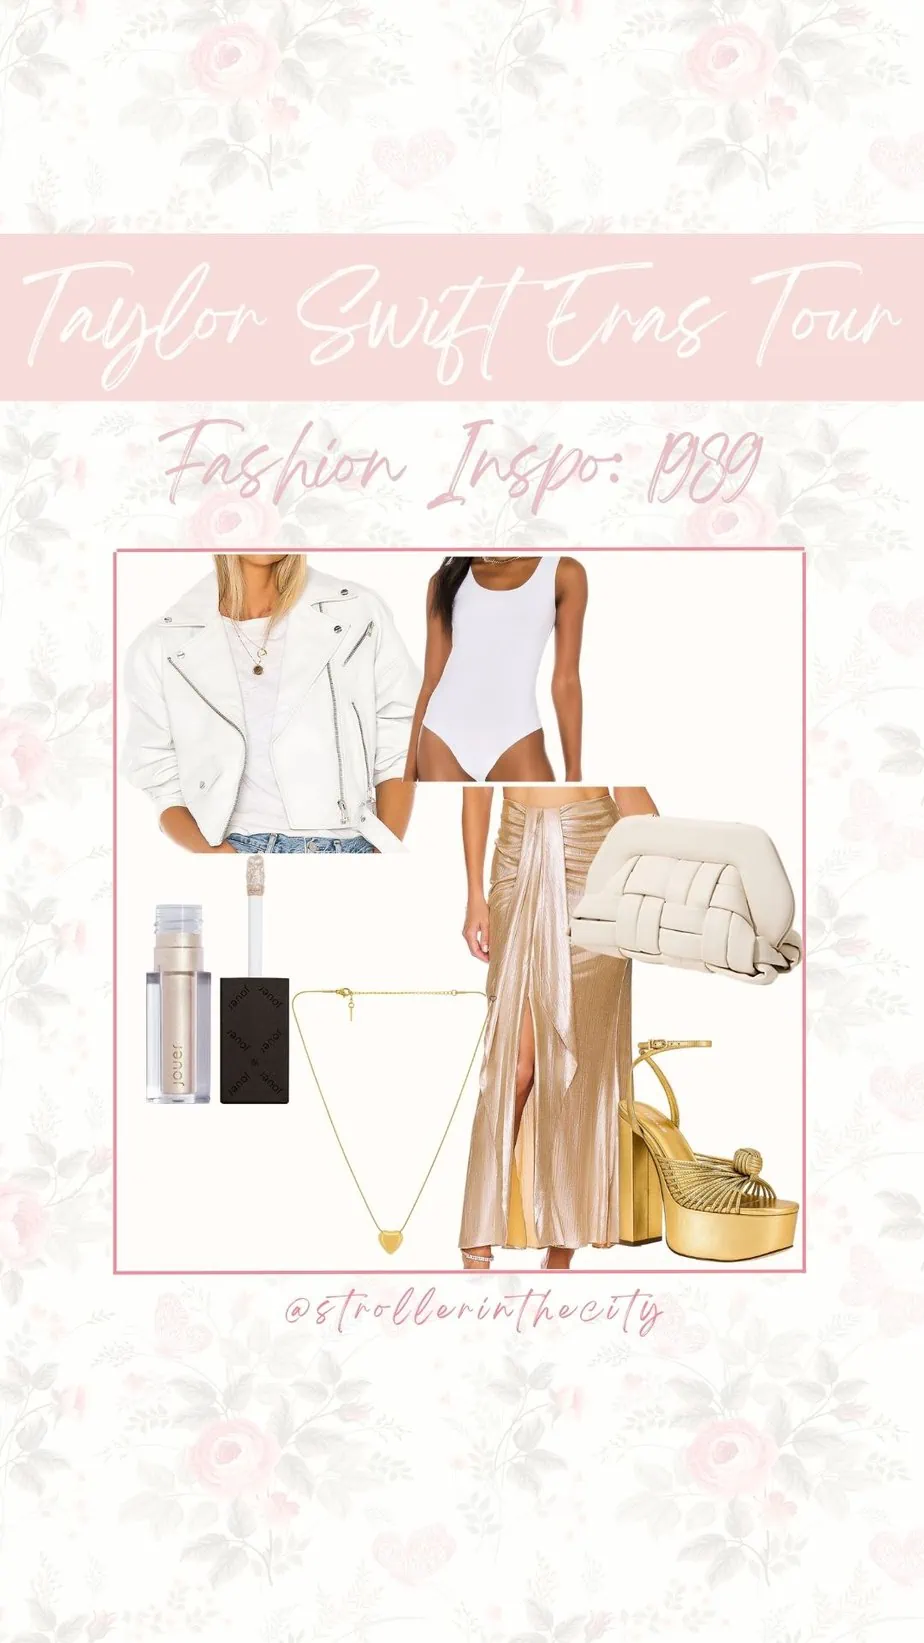 Concert outfit inspired by Taylor Swifts "1989" era featuring gold maxi skirt and white leather jacket